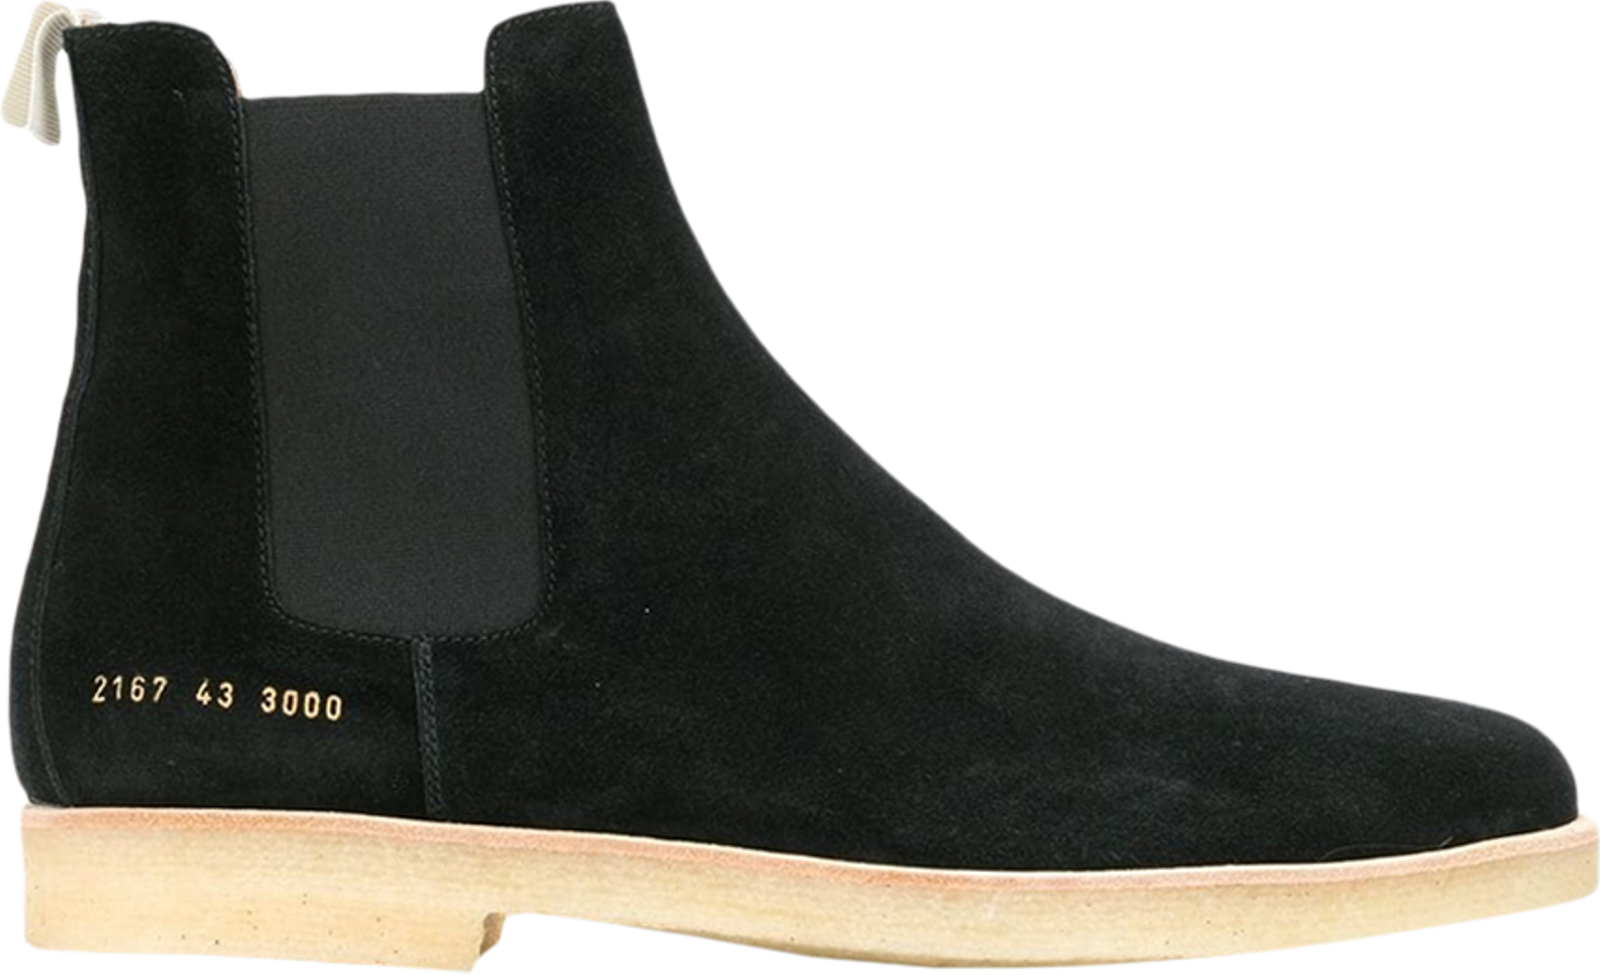 Buy Common Projects Chelsea Boot 'Black' - 2167 3000 - Black | GOAT